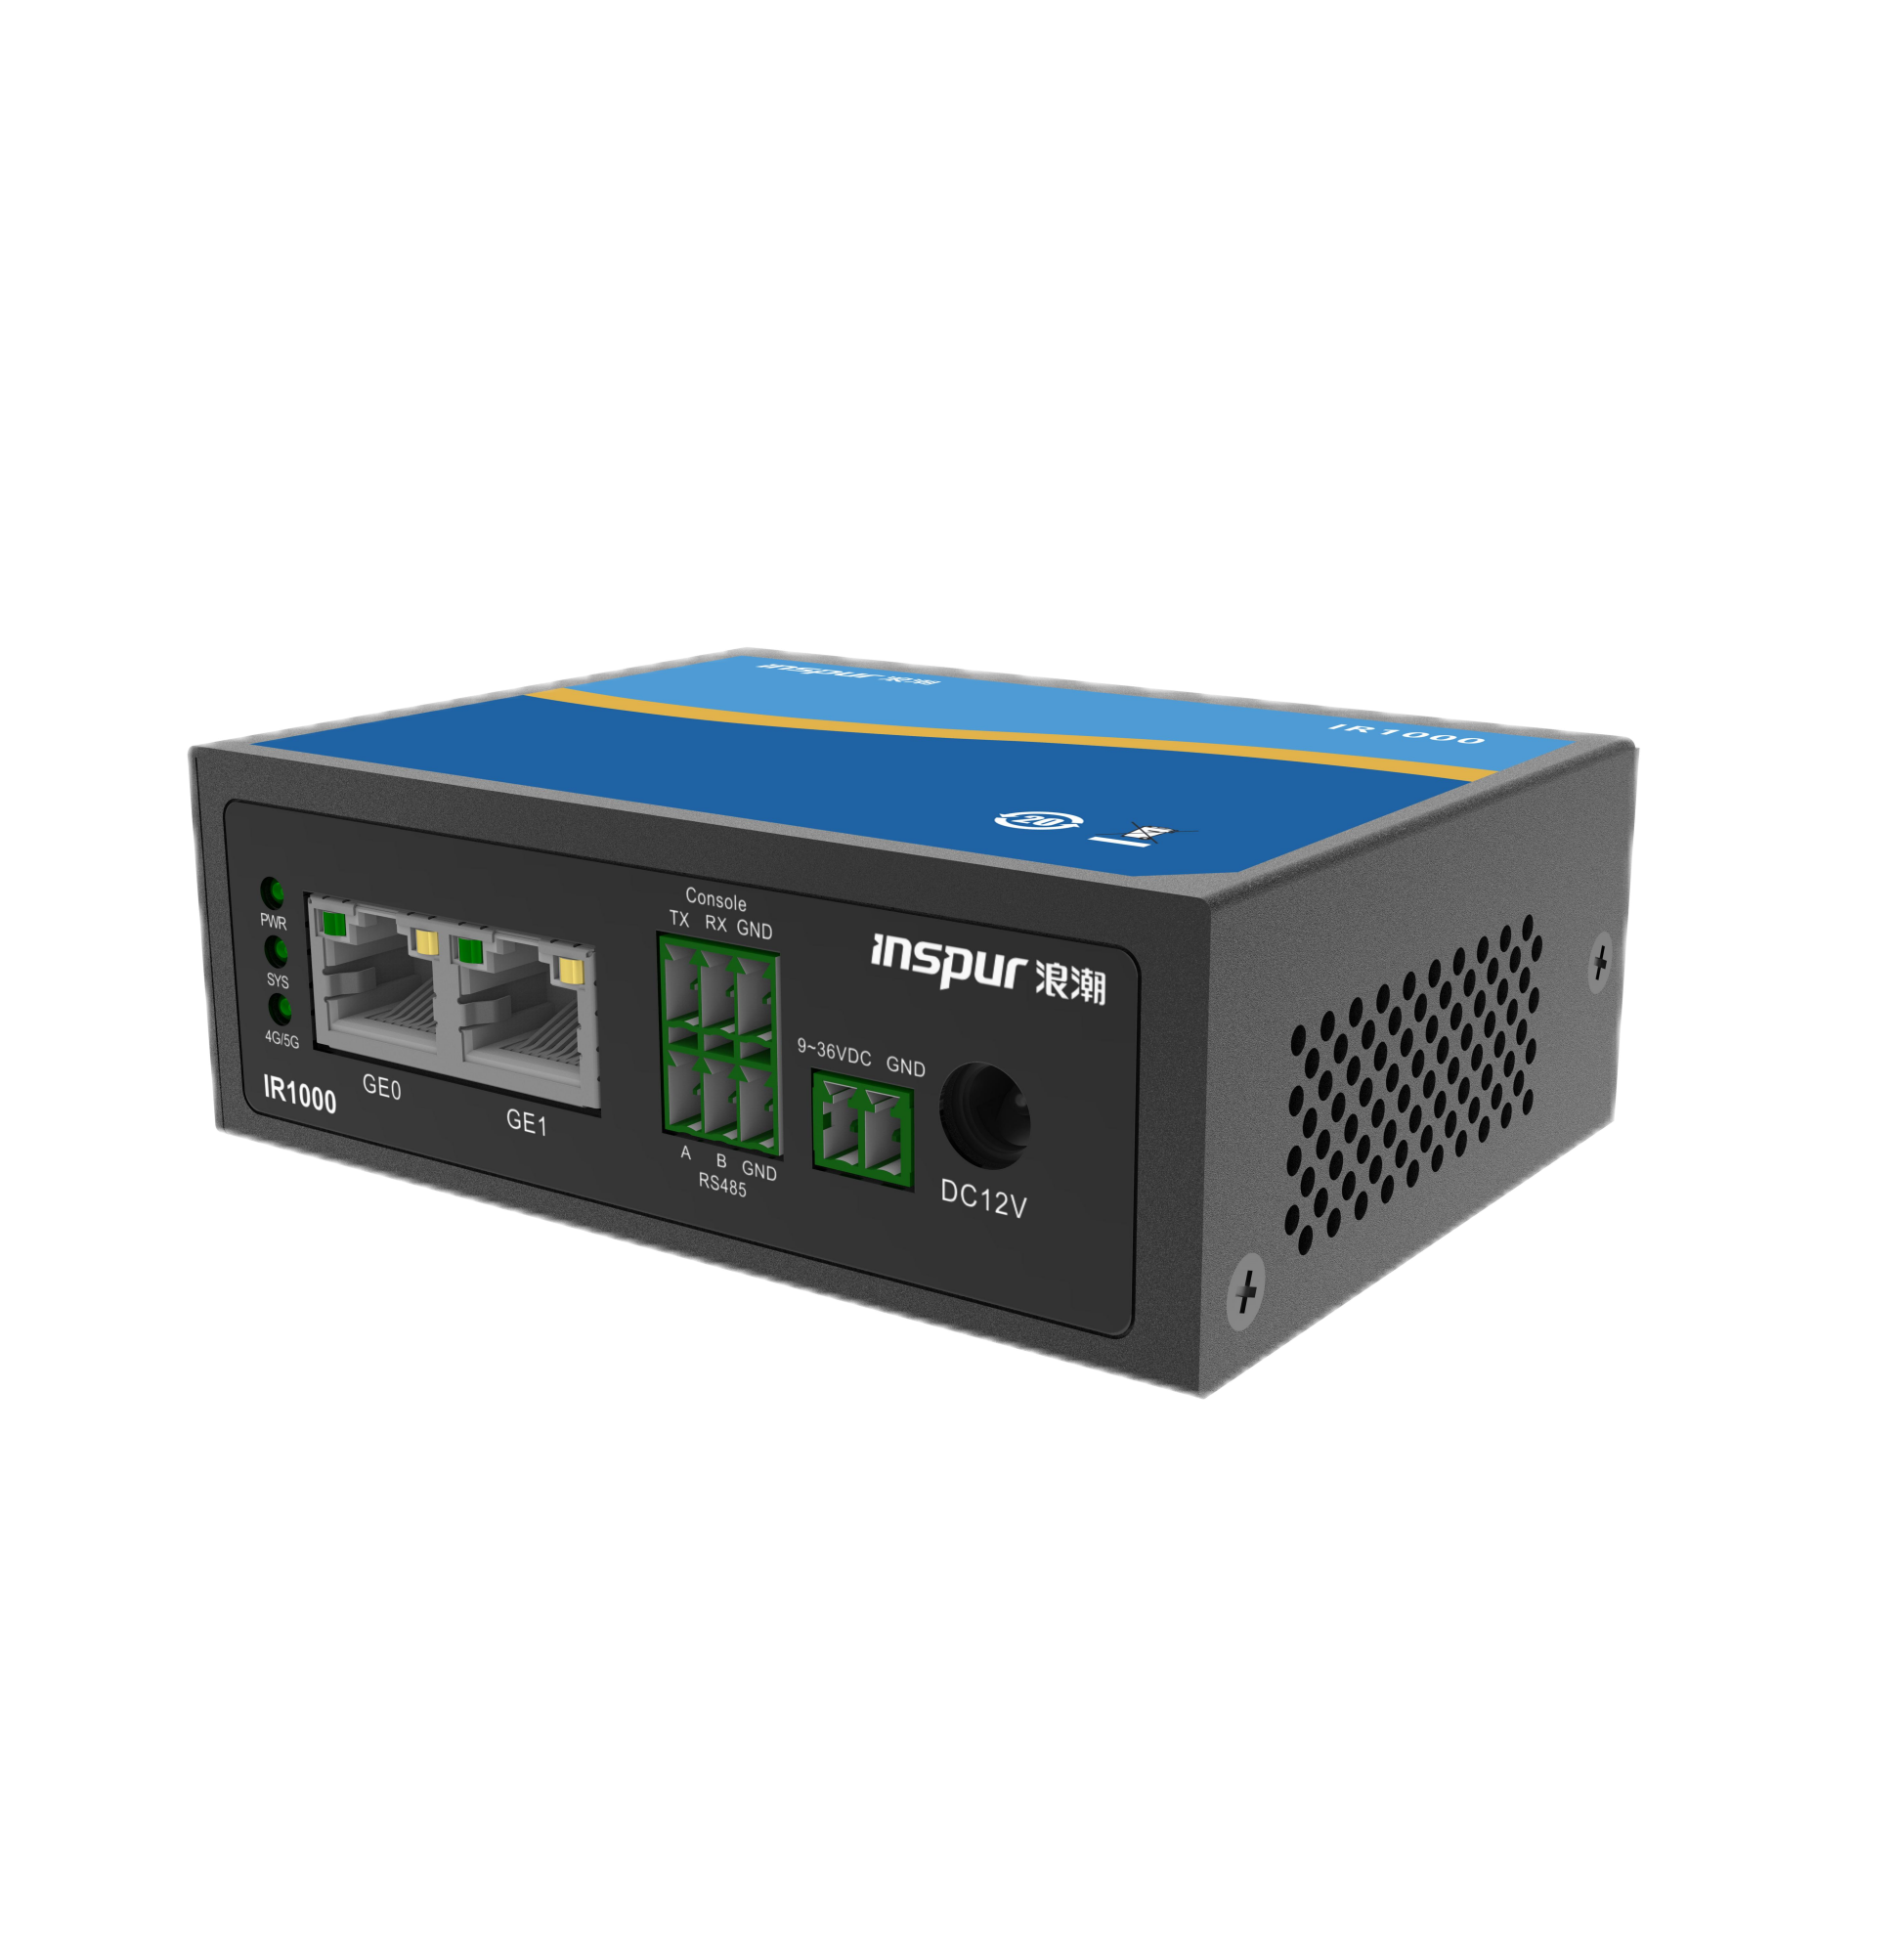 5G Industrial Router IR1000